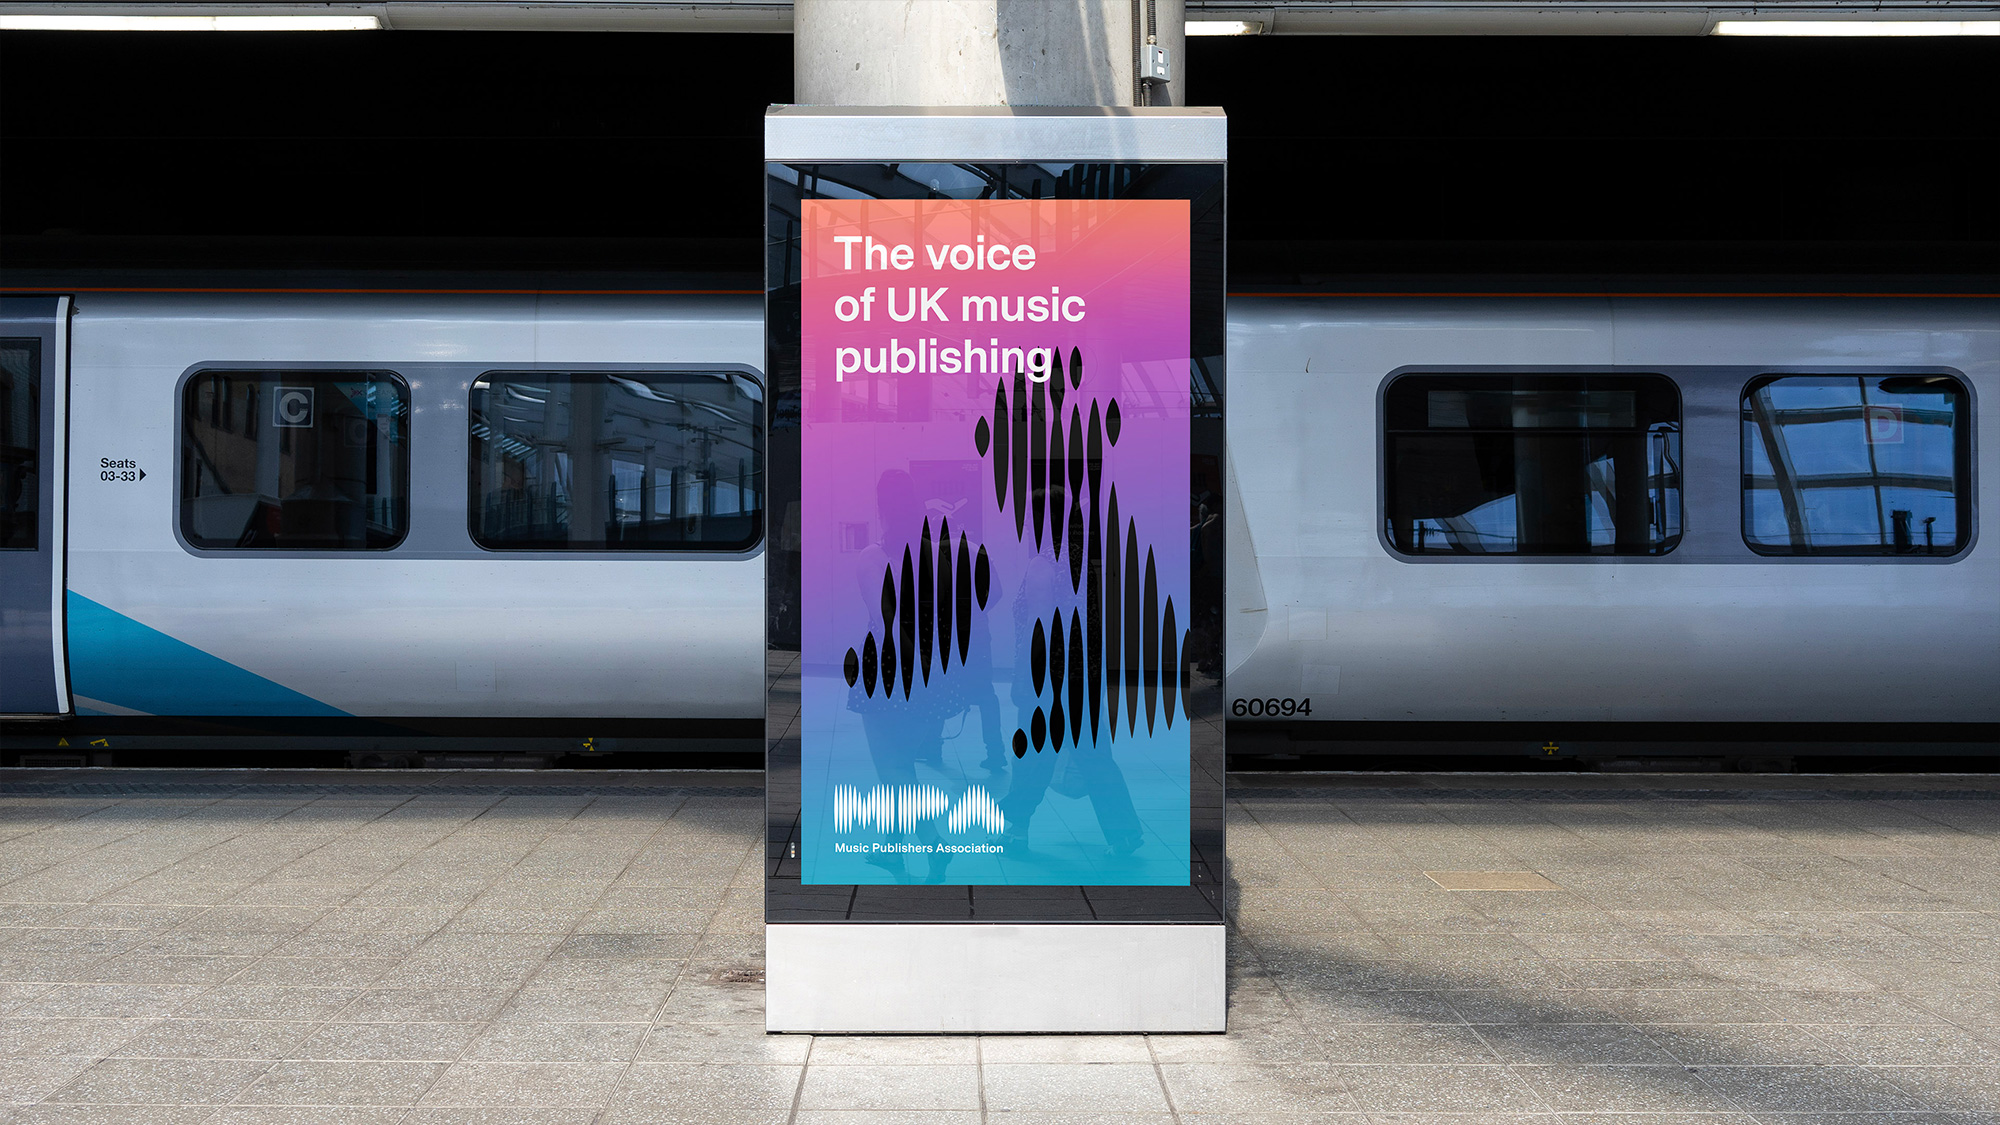 New Logo and Identity for Music Publishers Association by The Playground